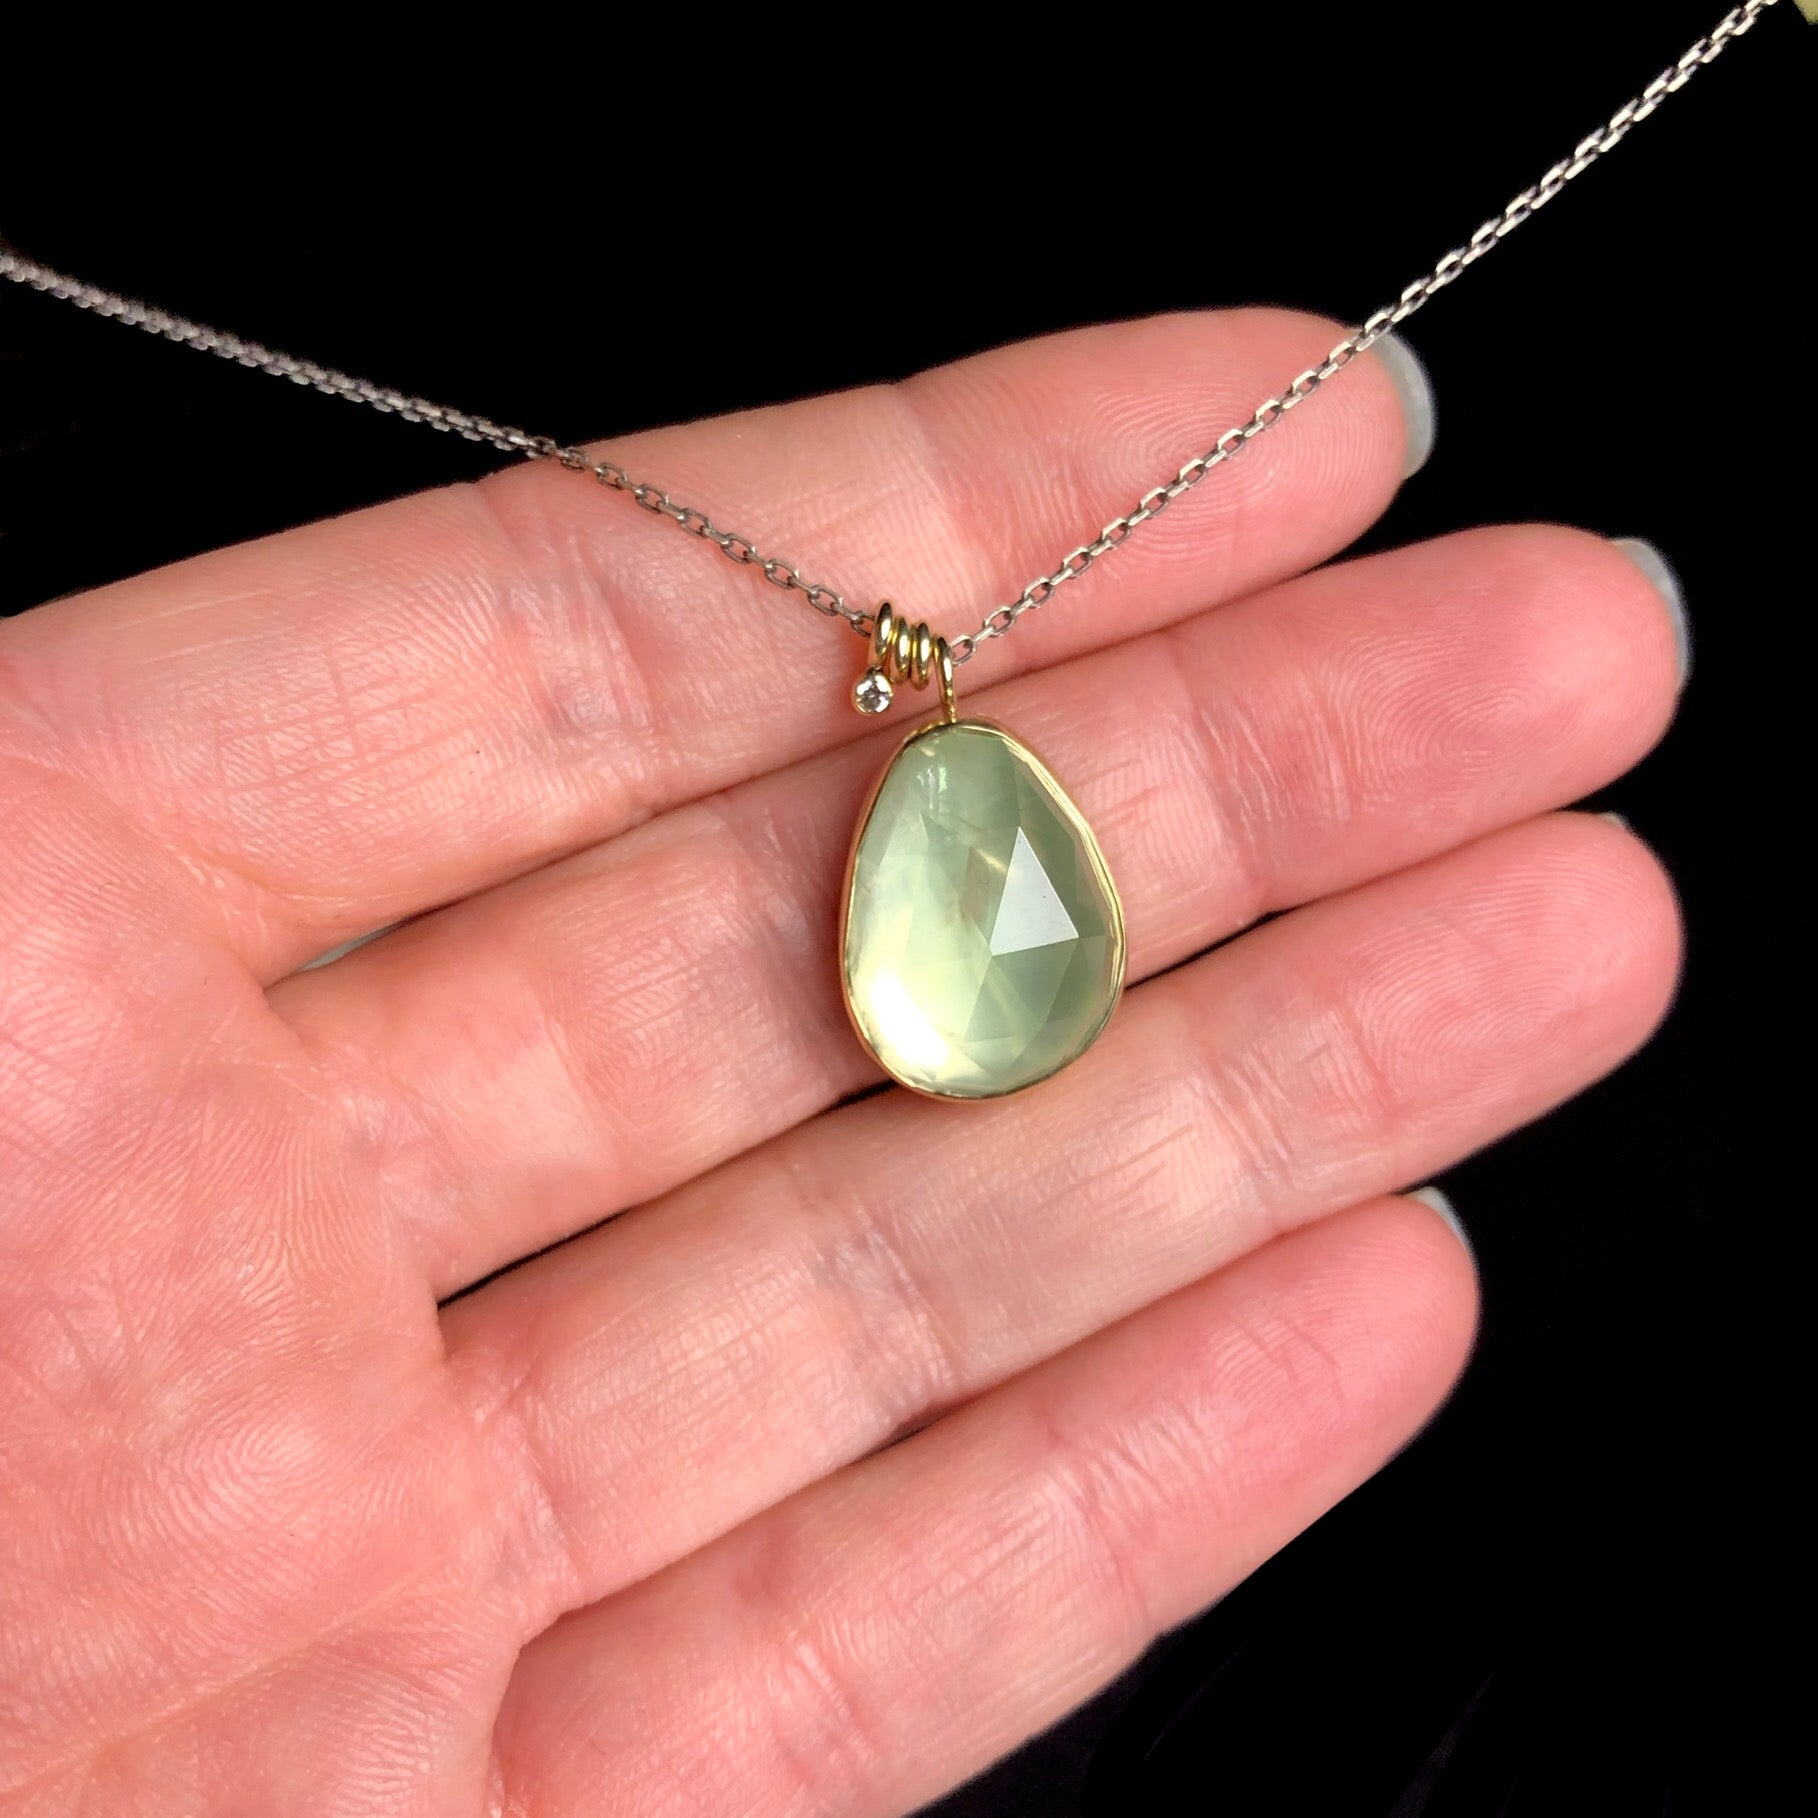 Light green teardrop shaped stone with gold setting on blackened silver chain shown in hand